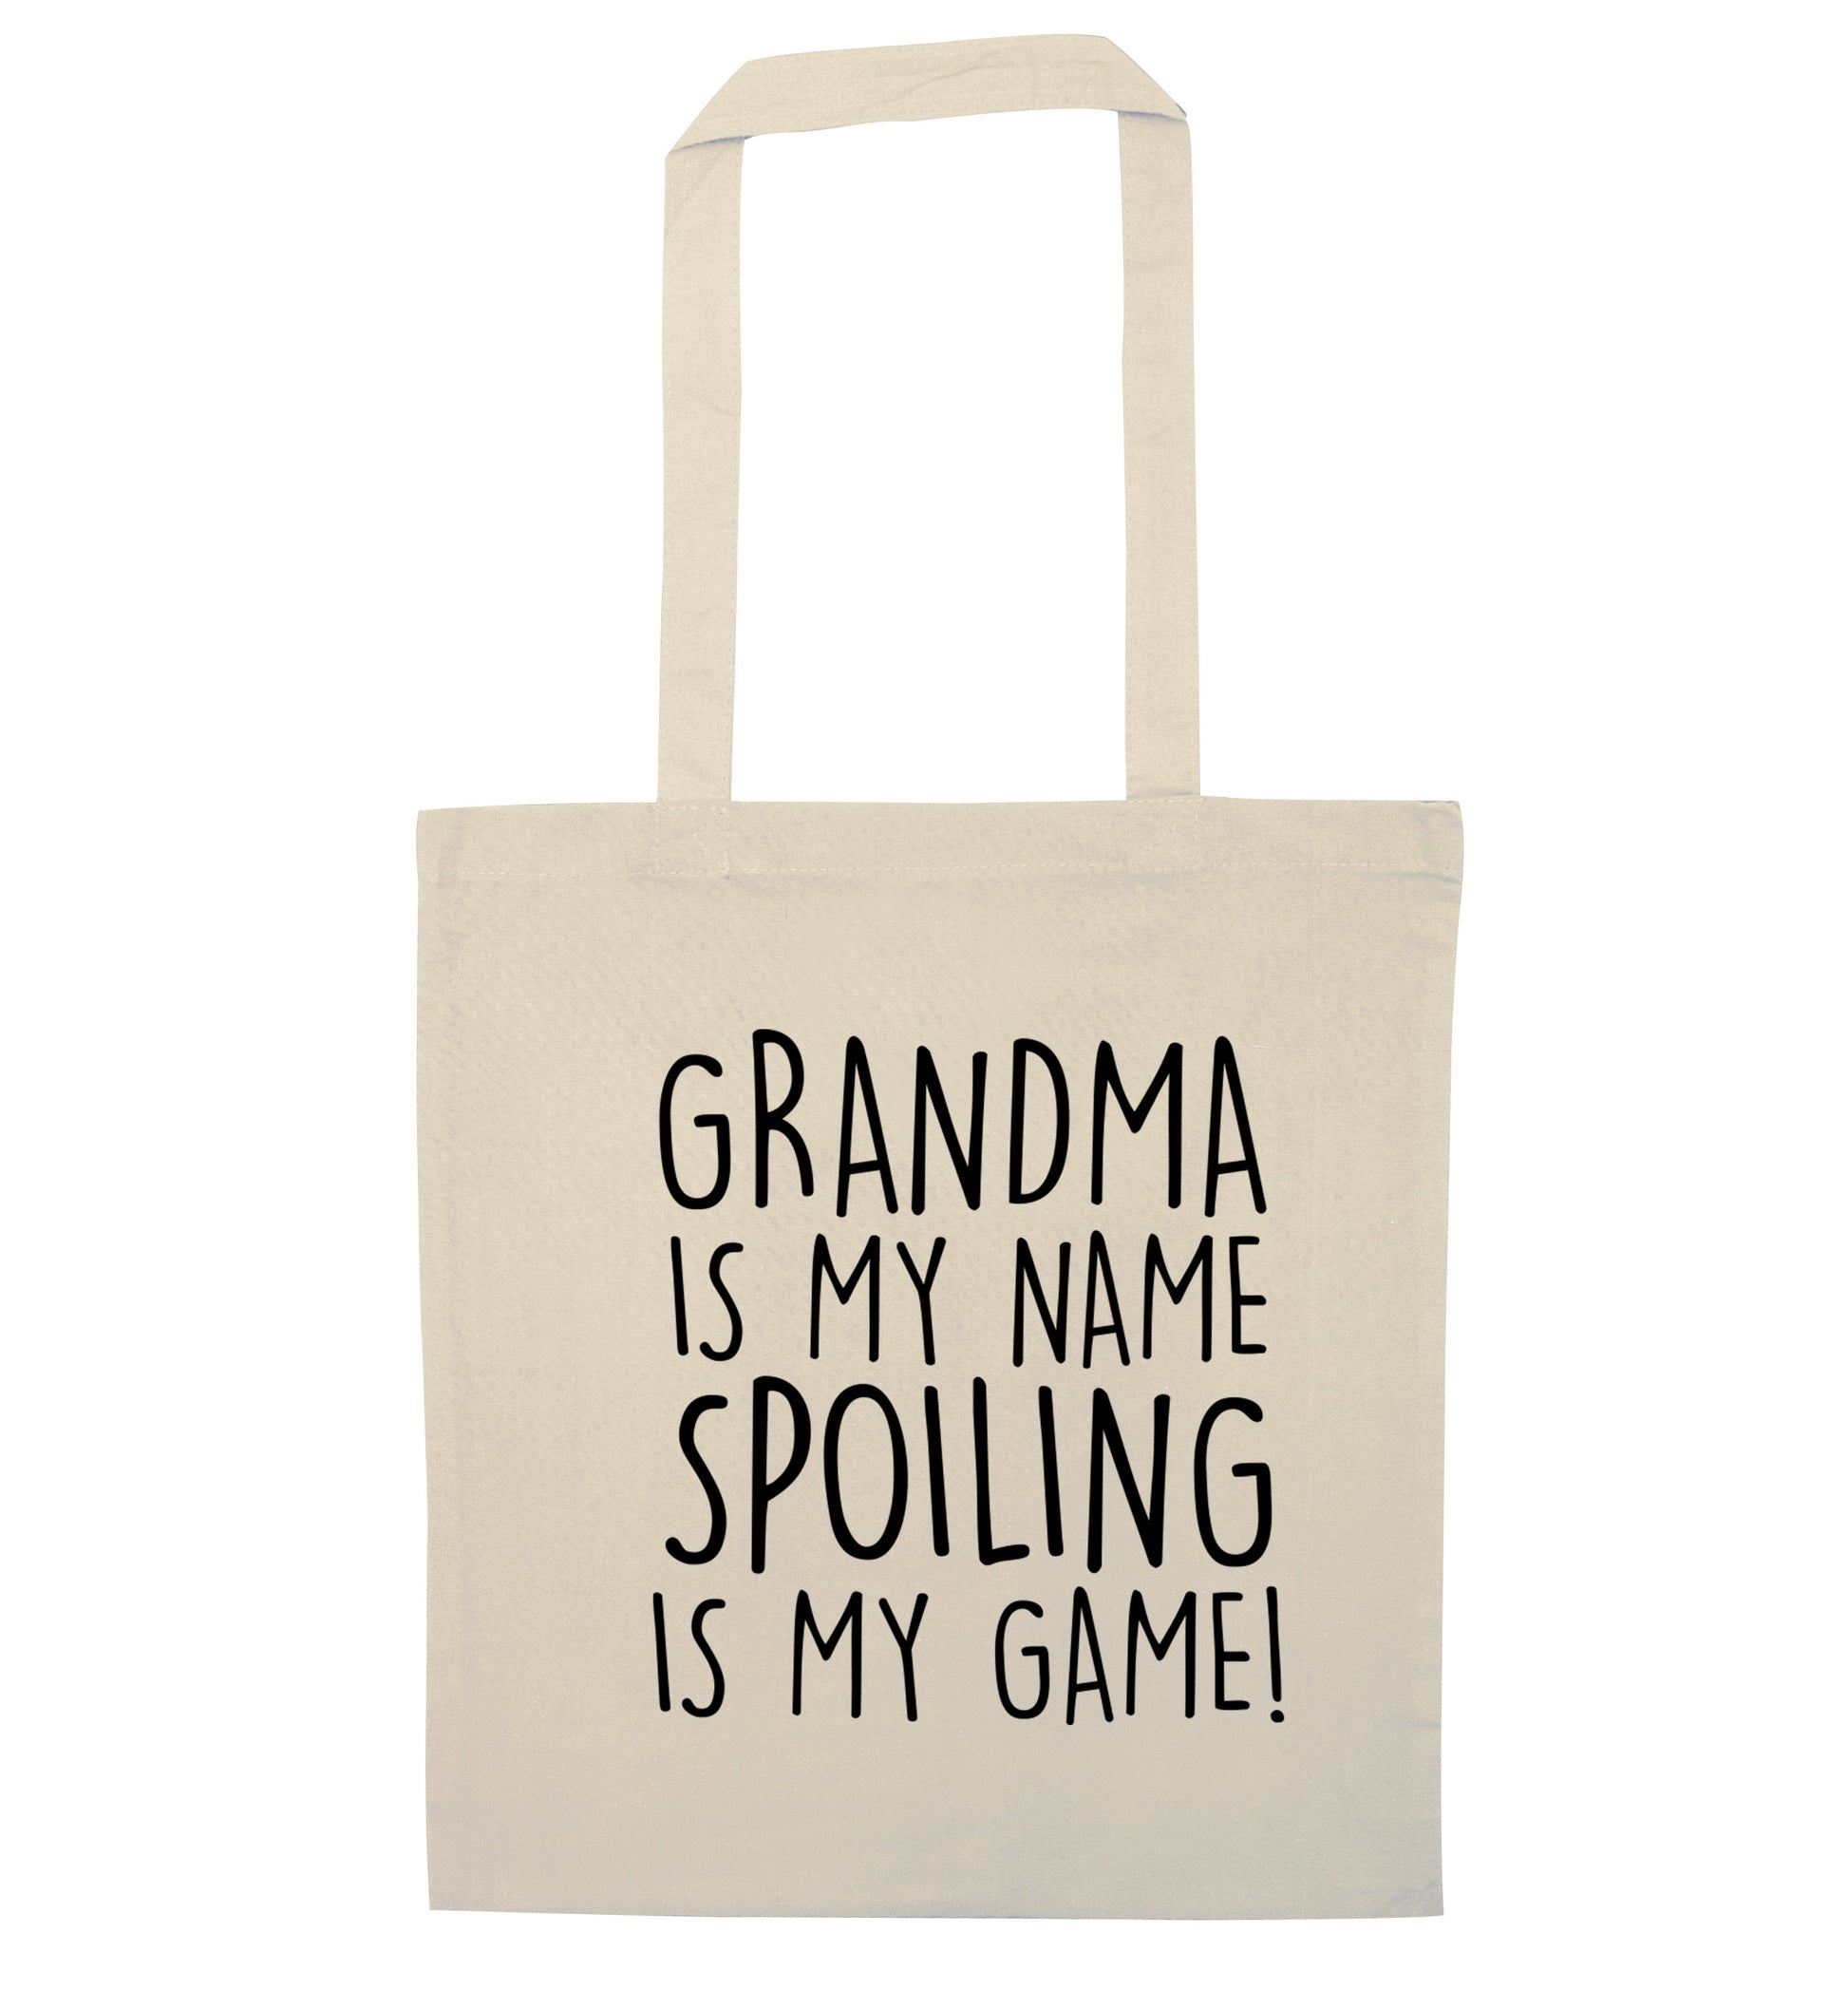 Grandma is my name, spoiling is my game natural tote bag